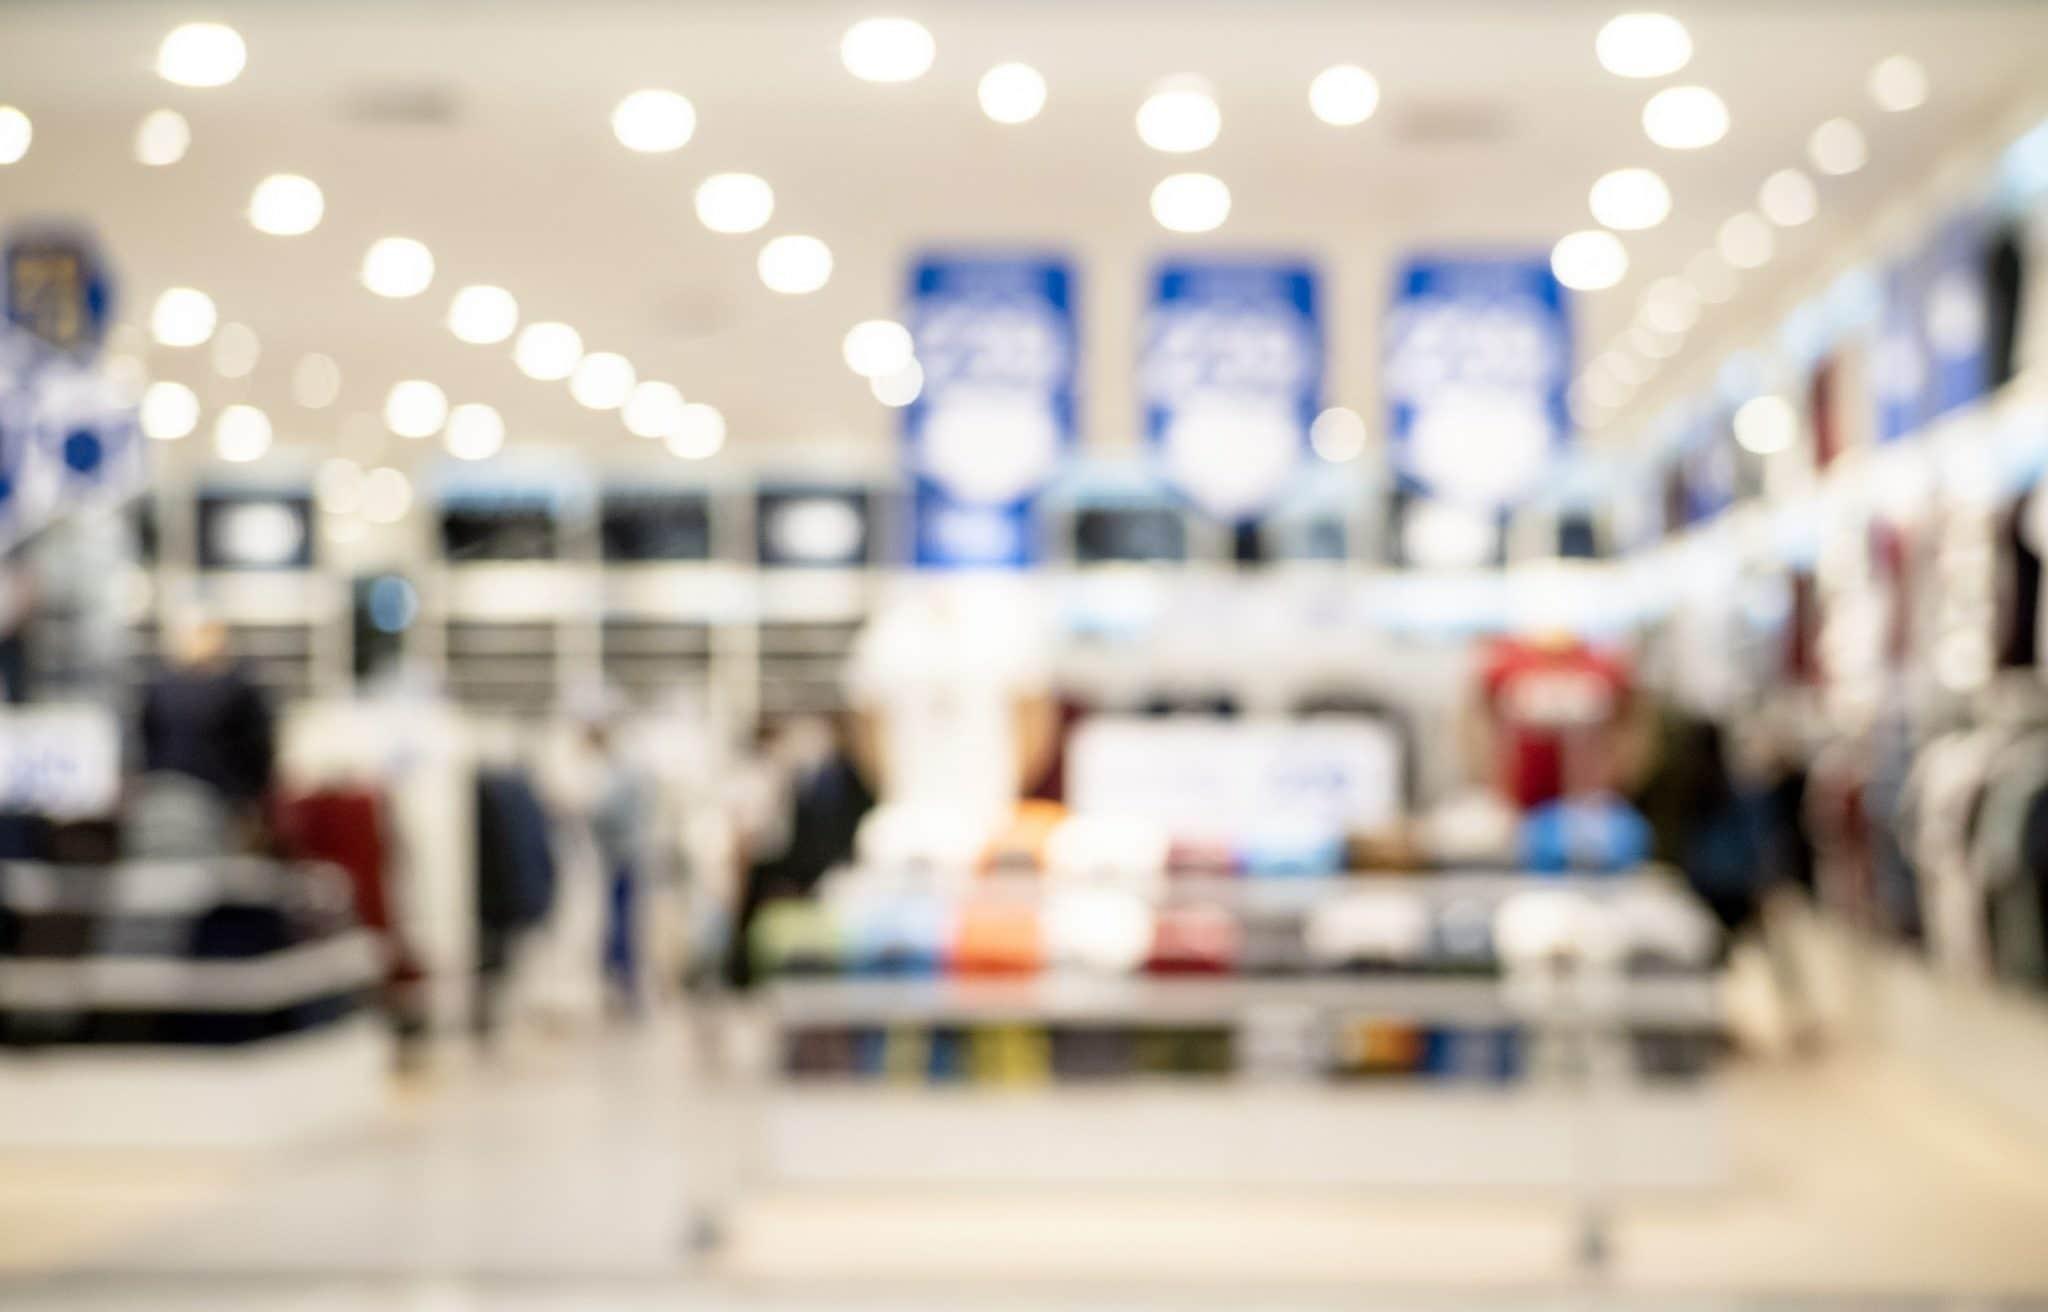 Blurred photo of the interior of a department store